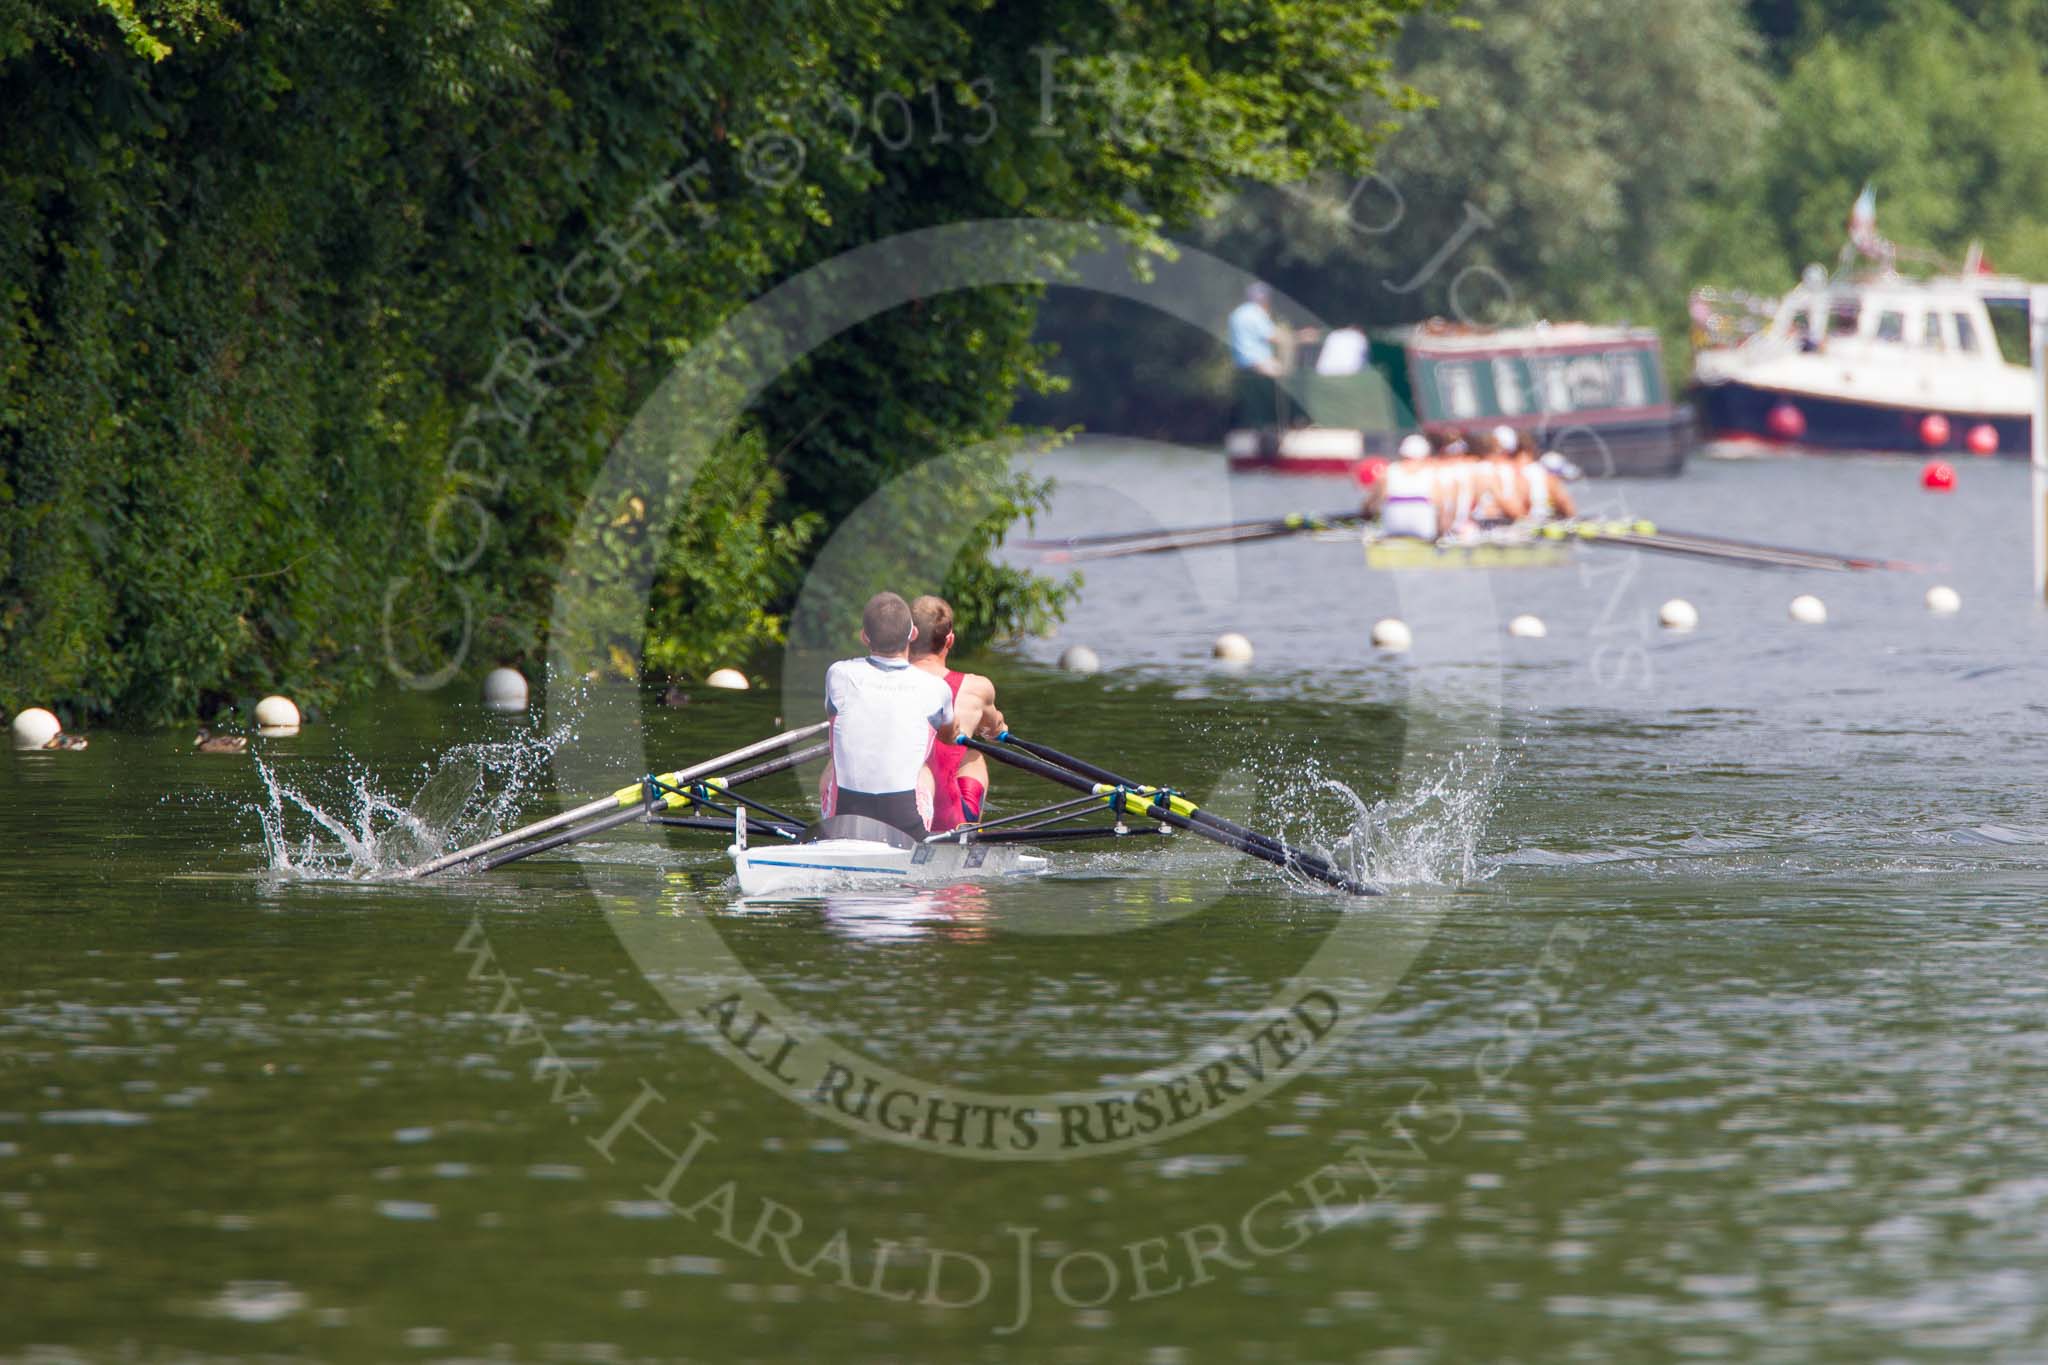 Henley Royal Regatta 2013, Saturday: Race No. 13 for the Double Sculls Challenge Cup, Oxford Brookes University and Leander Club (white boat) v London Rowing Club and Leander Club (yellow boat). Image #256, 06 July 2013 12:02 River Thames, Henley on Thames, UK